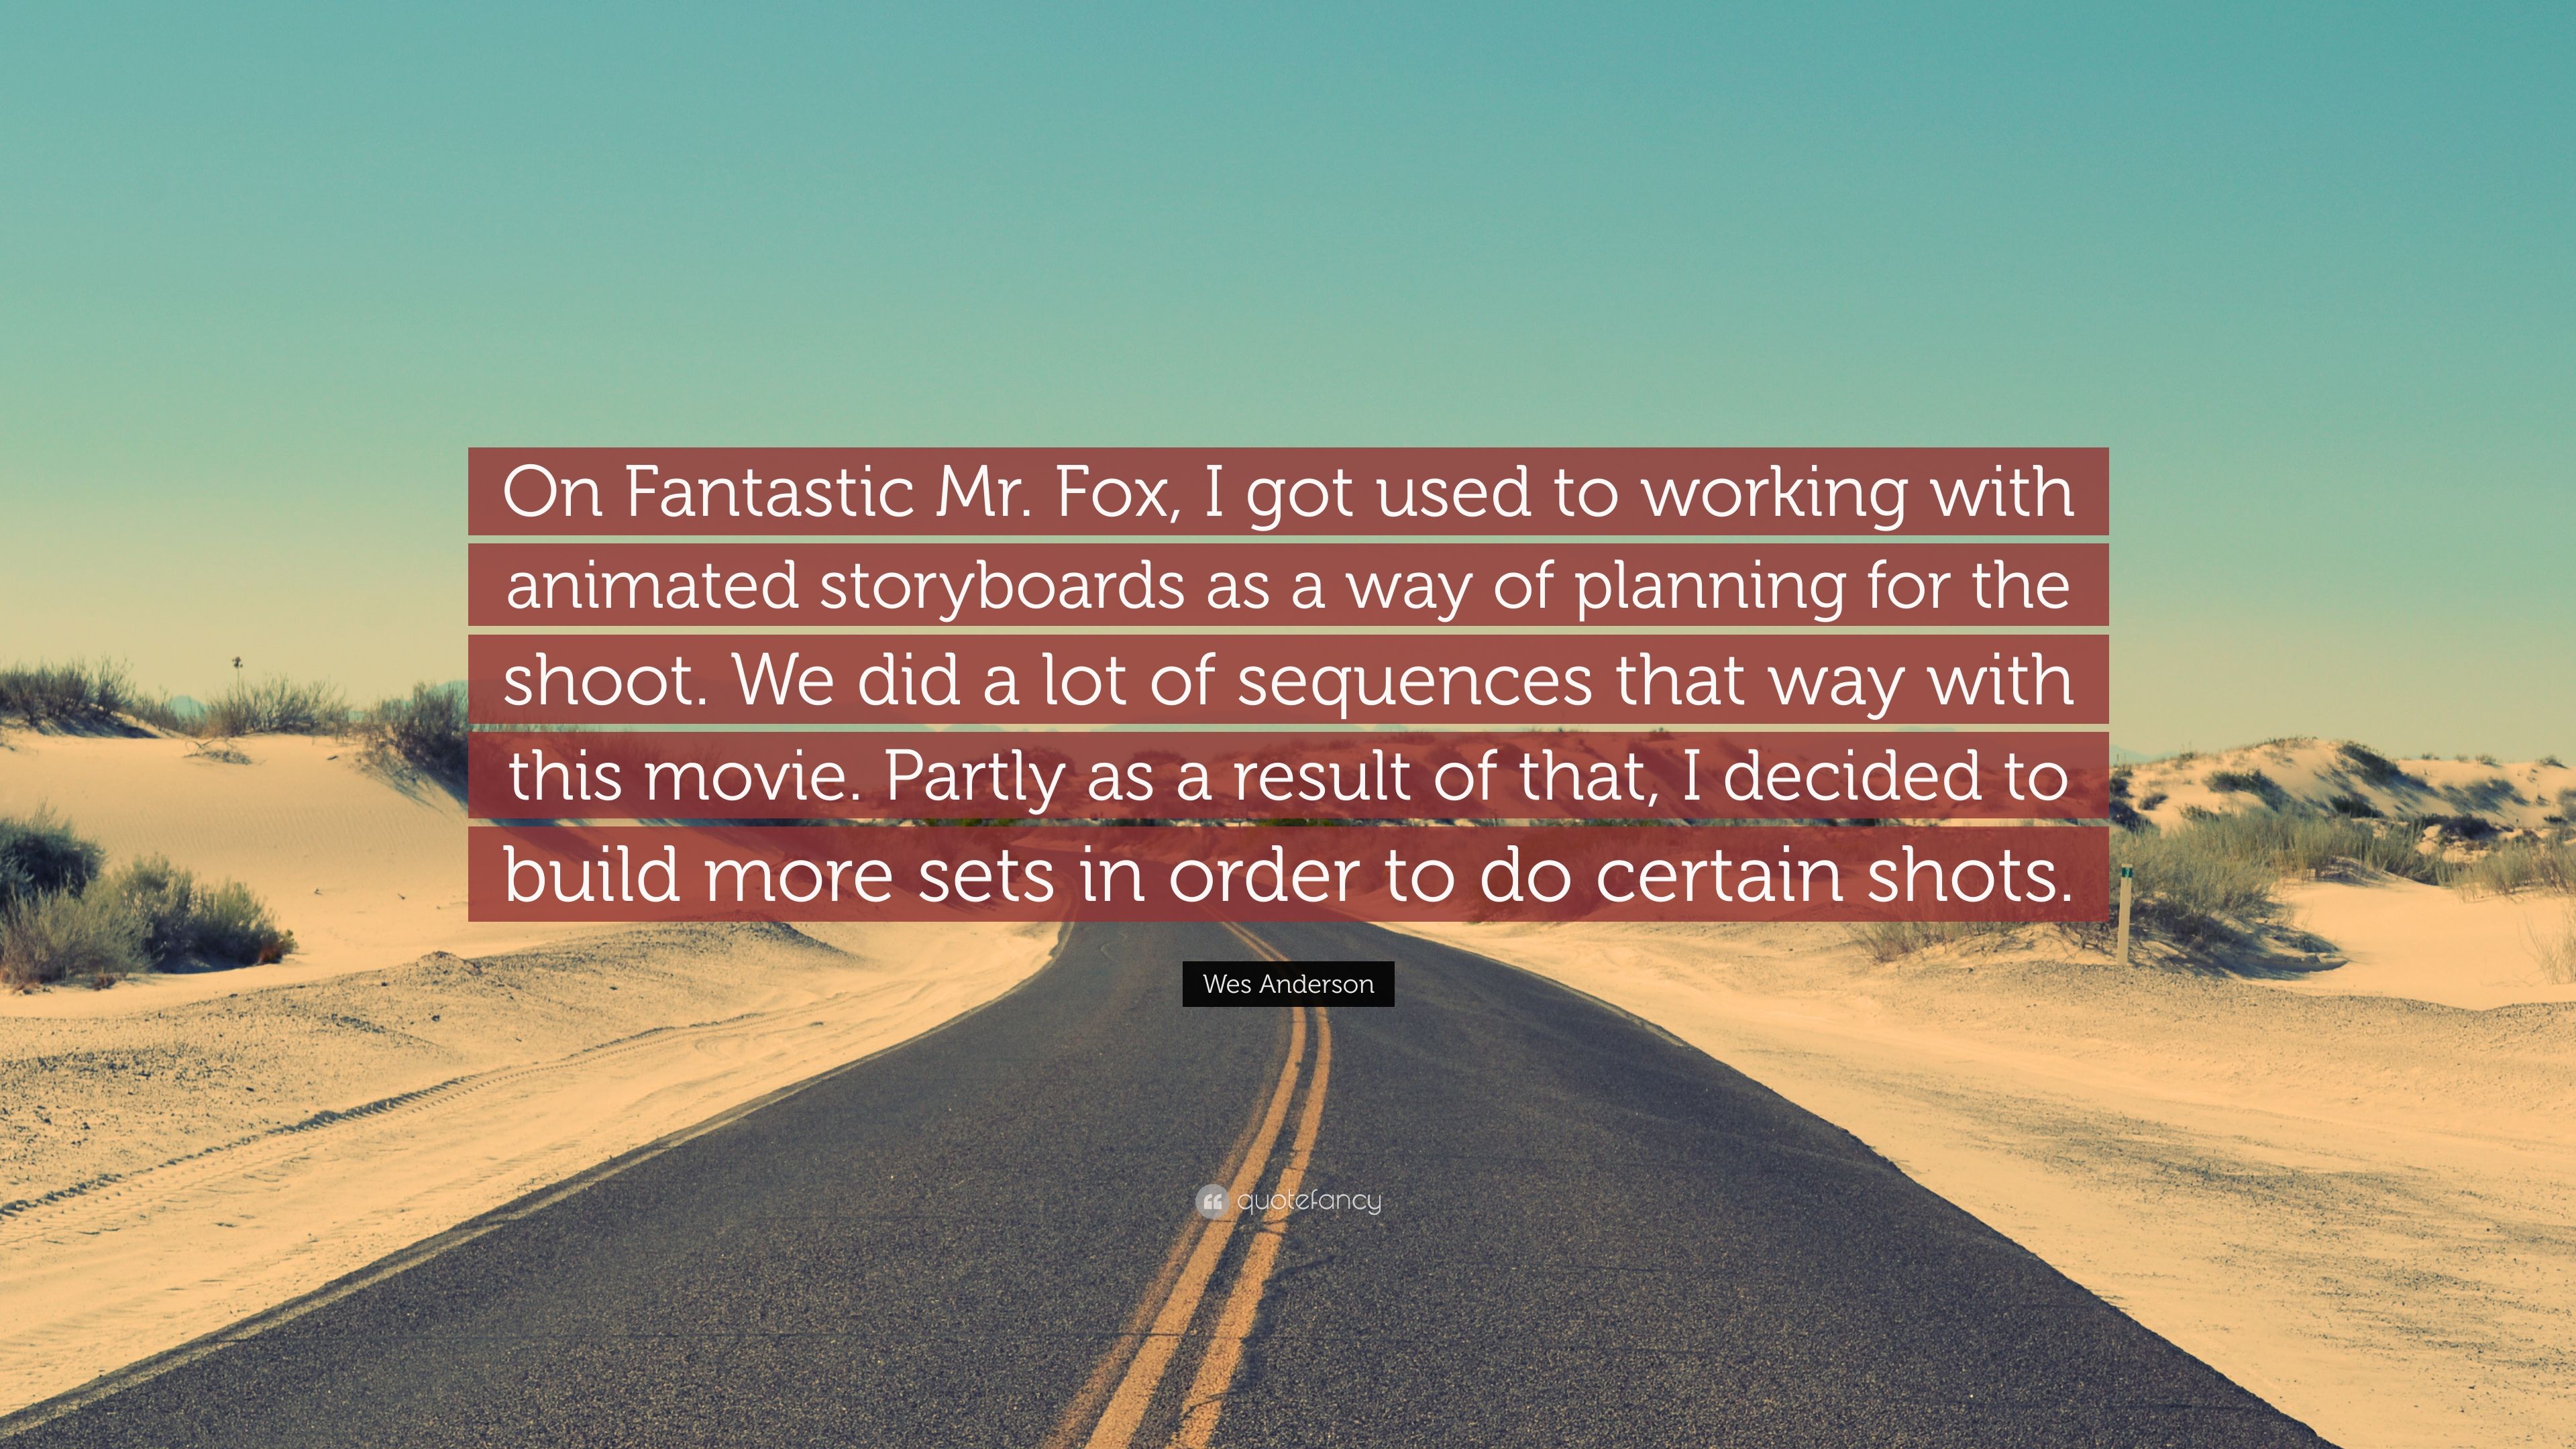 Wes Anderson Quote: “On Fantastic Mr. Fox, I got used to working